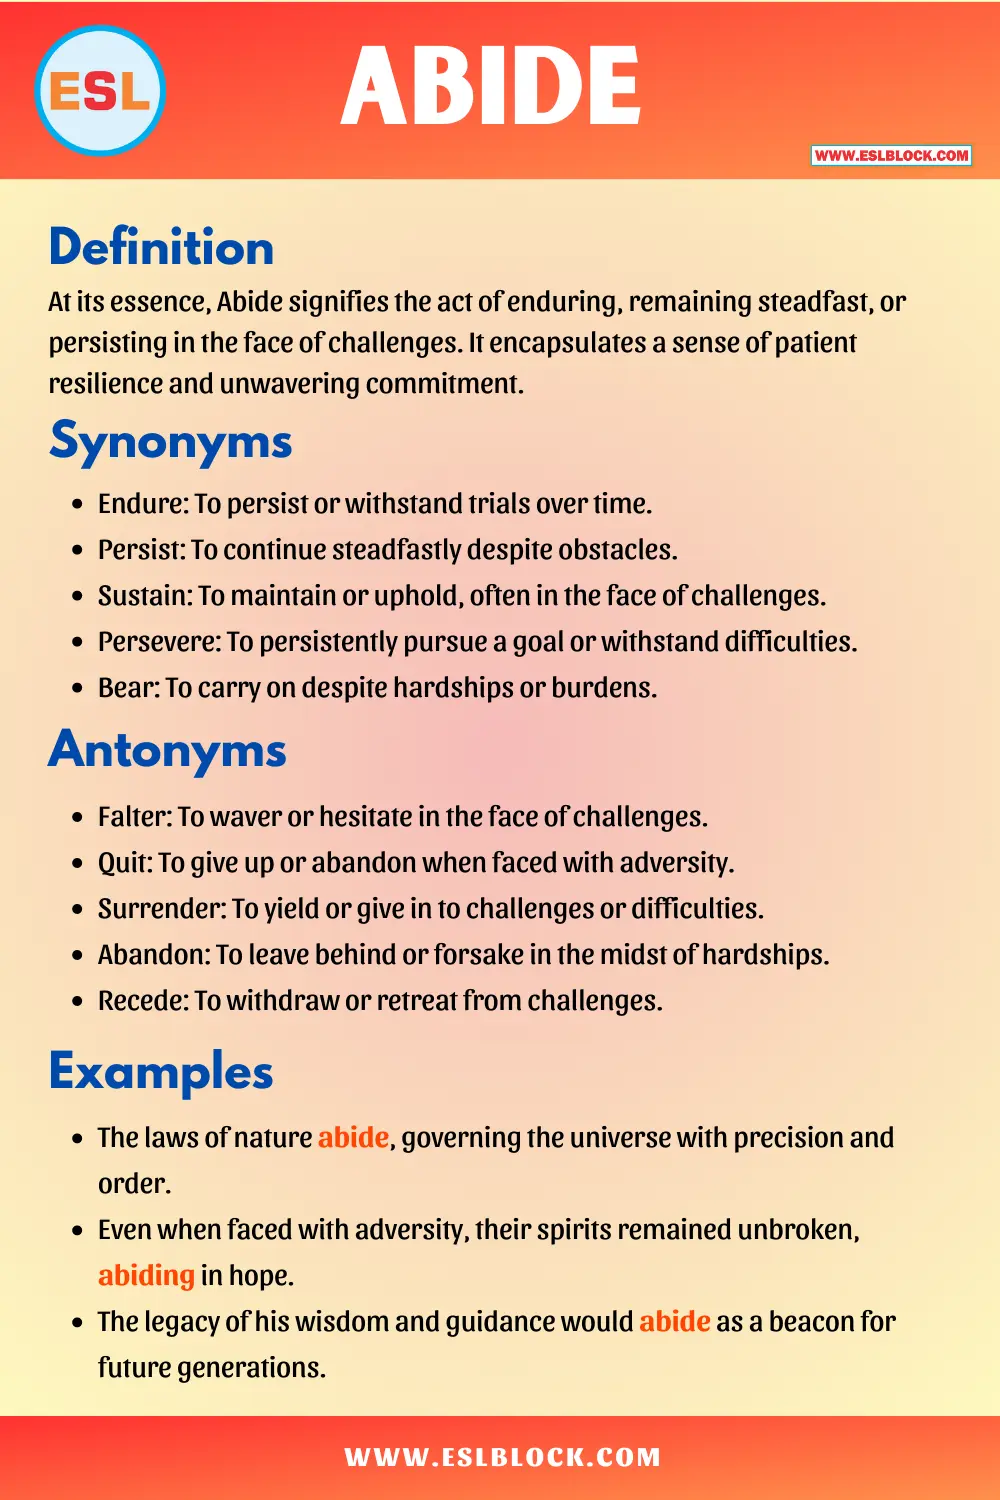 Abide Synonyms, Antonyms, Meaning, Definition